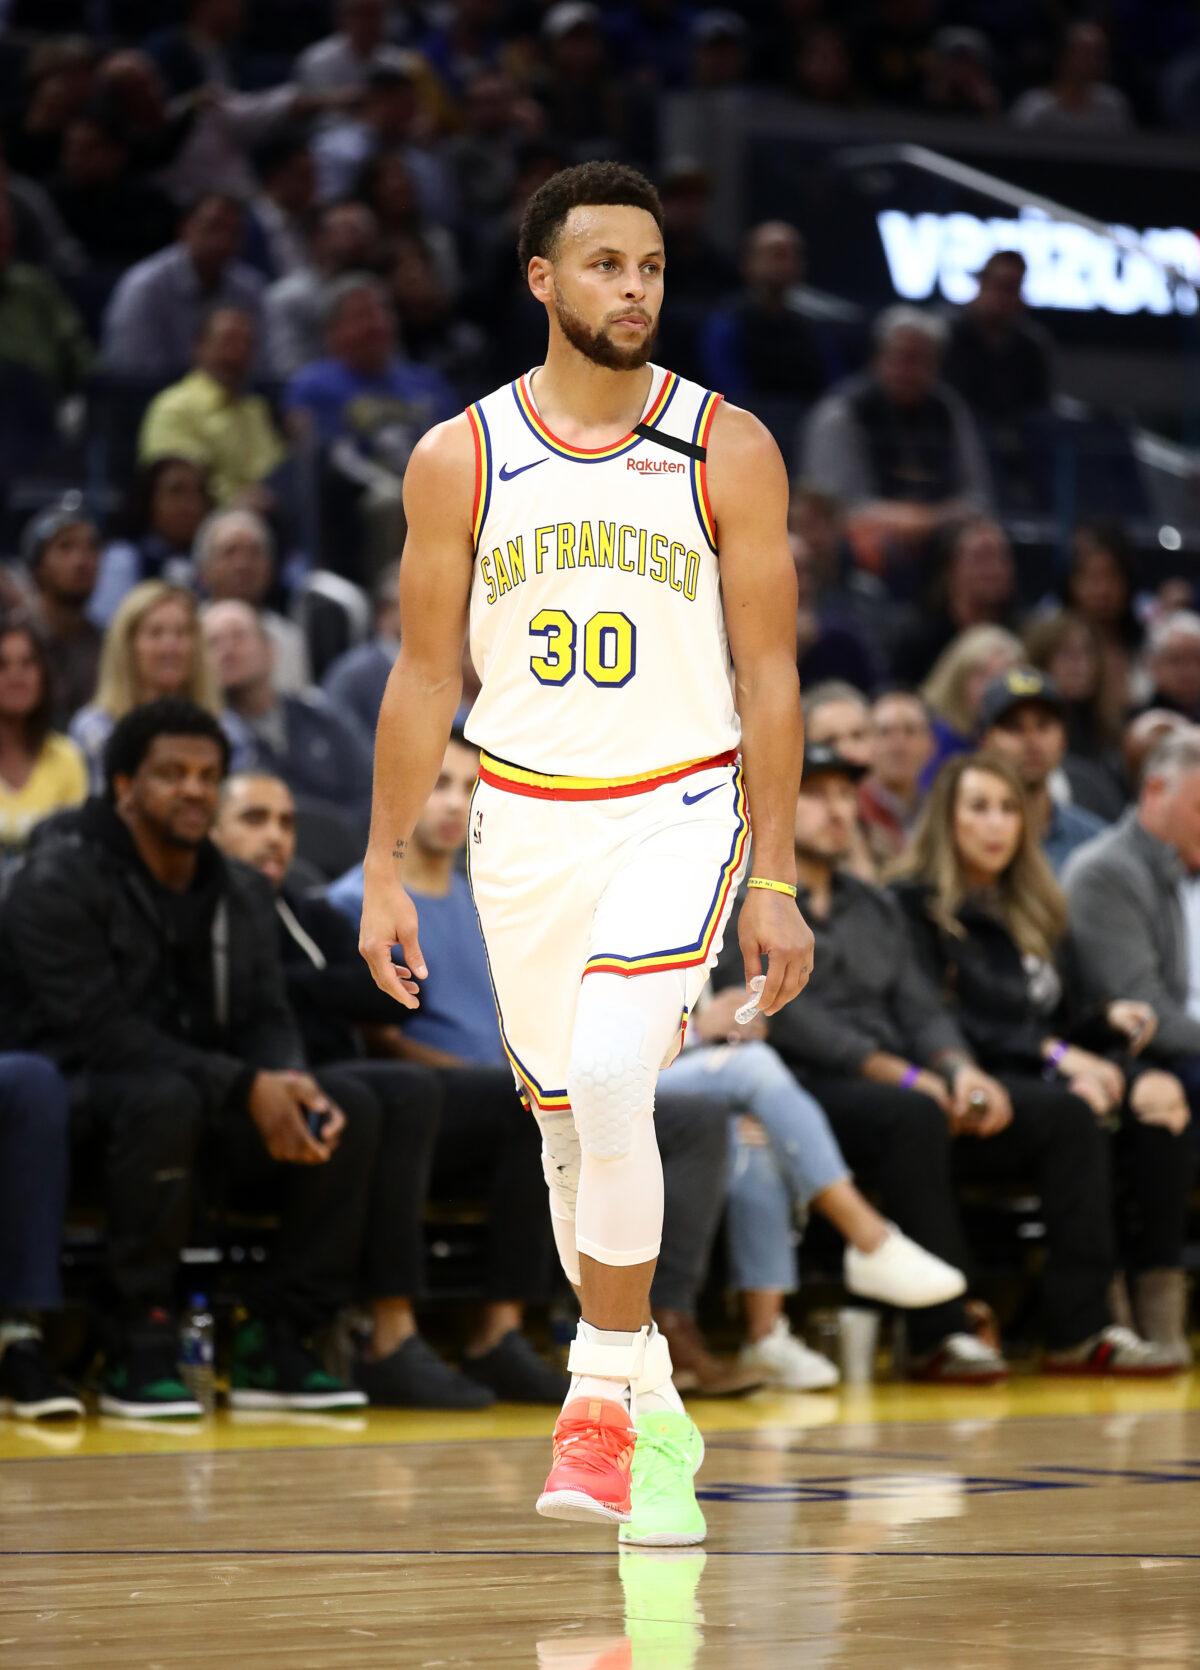 Stephen Curry #30 of the Golden State Warriors in action against the Toronto Raptors at Chase Center in San Francisco, California on March 5, 2020. (Justin Sullivan/Getty Images)